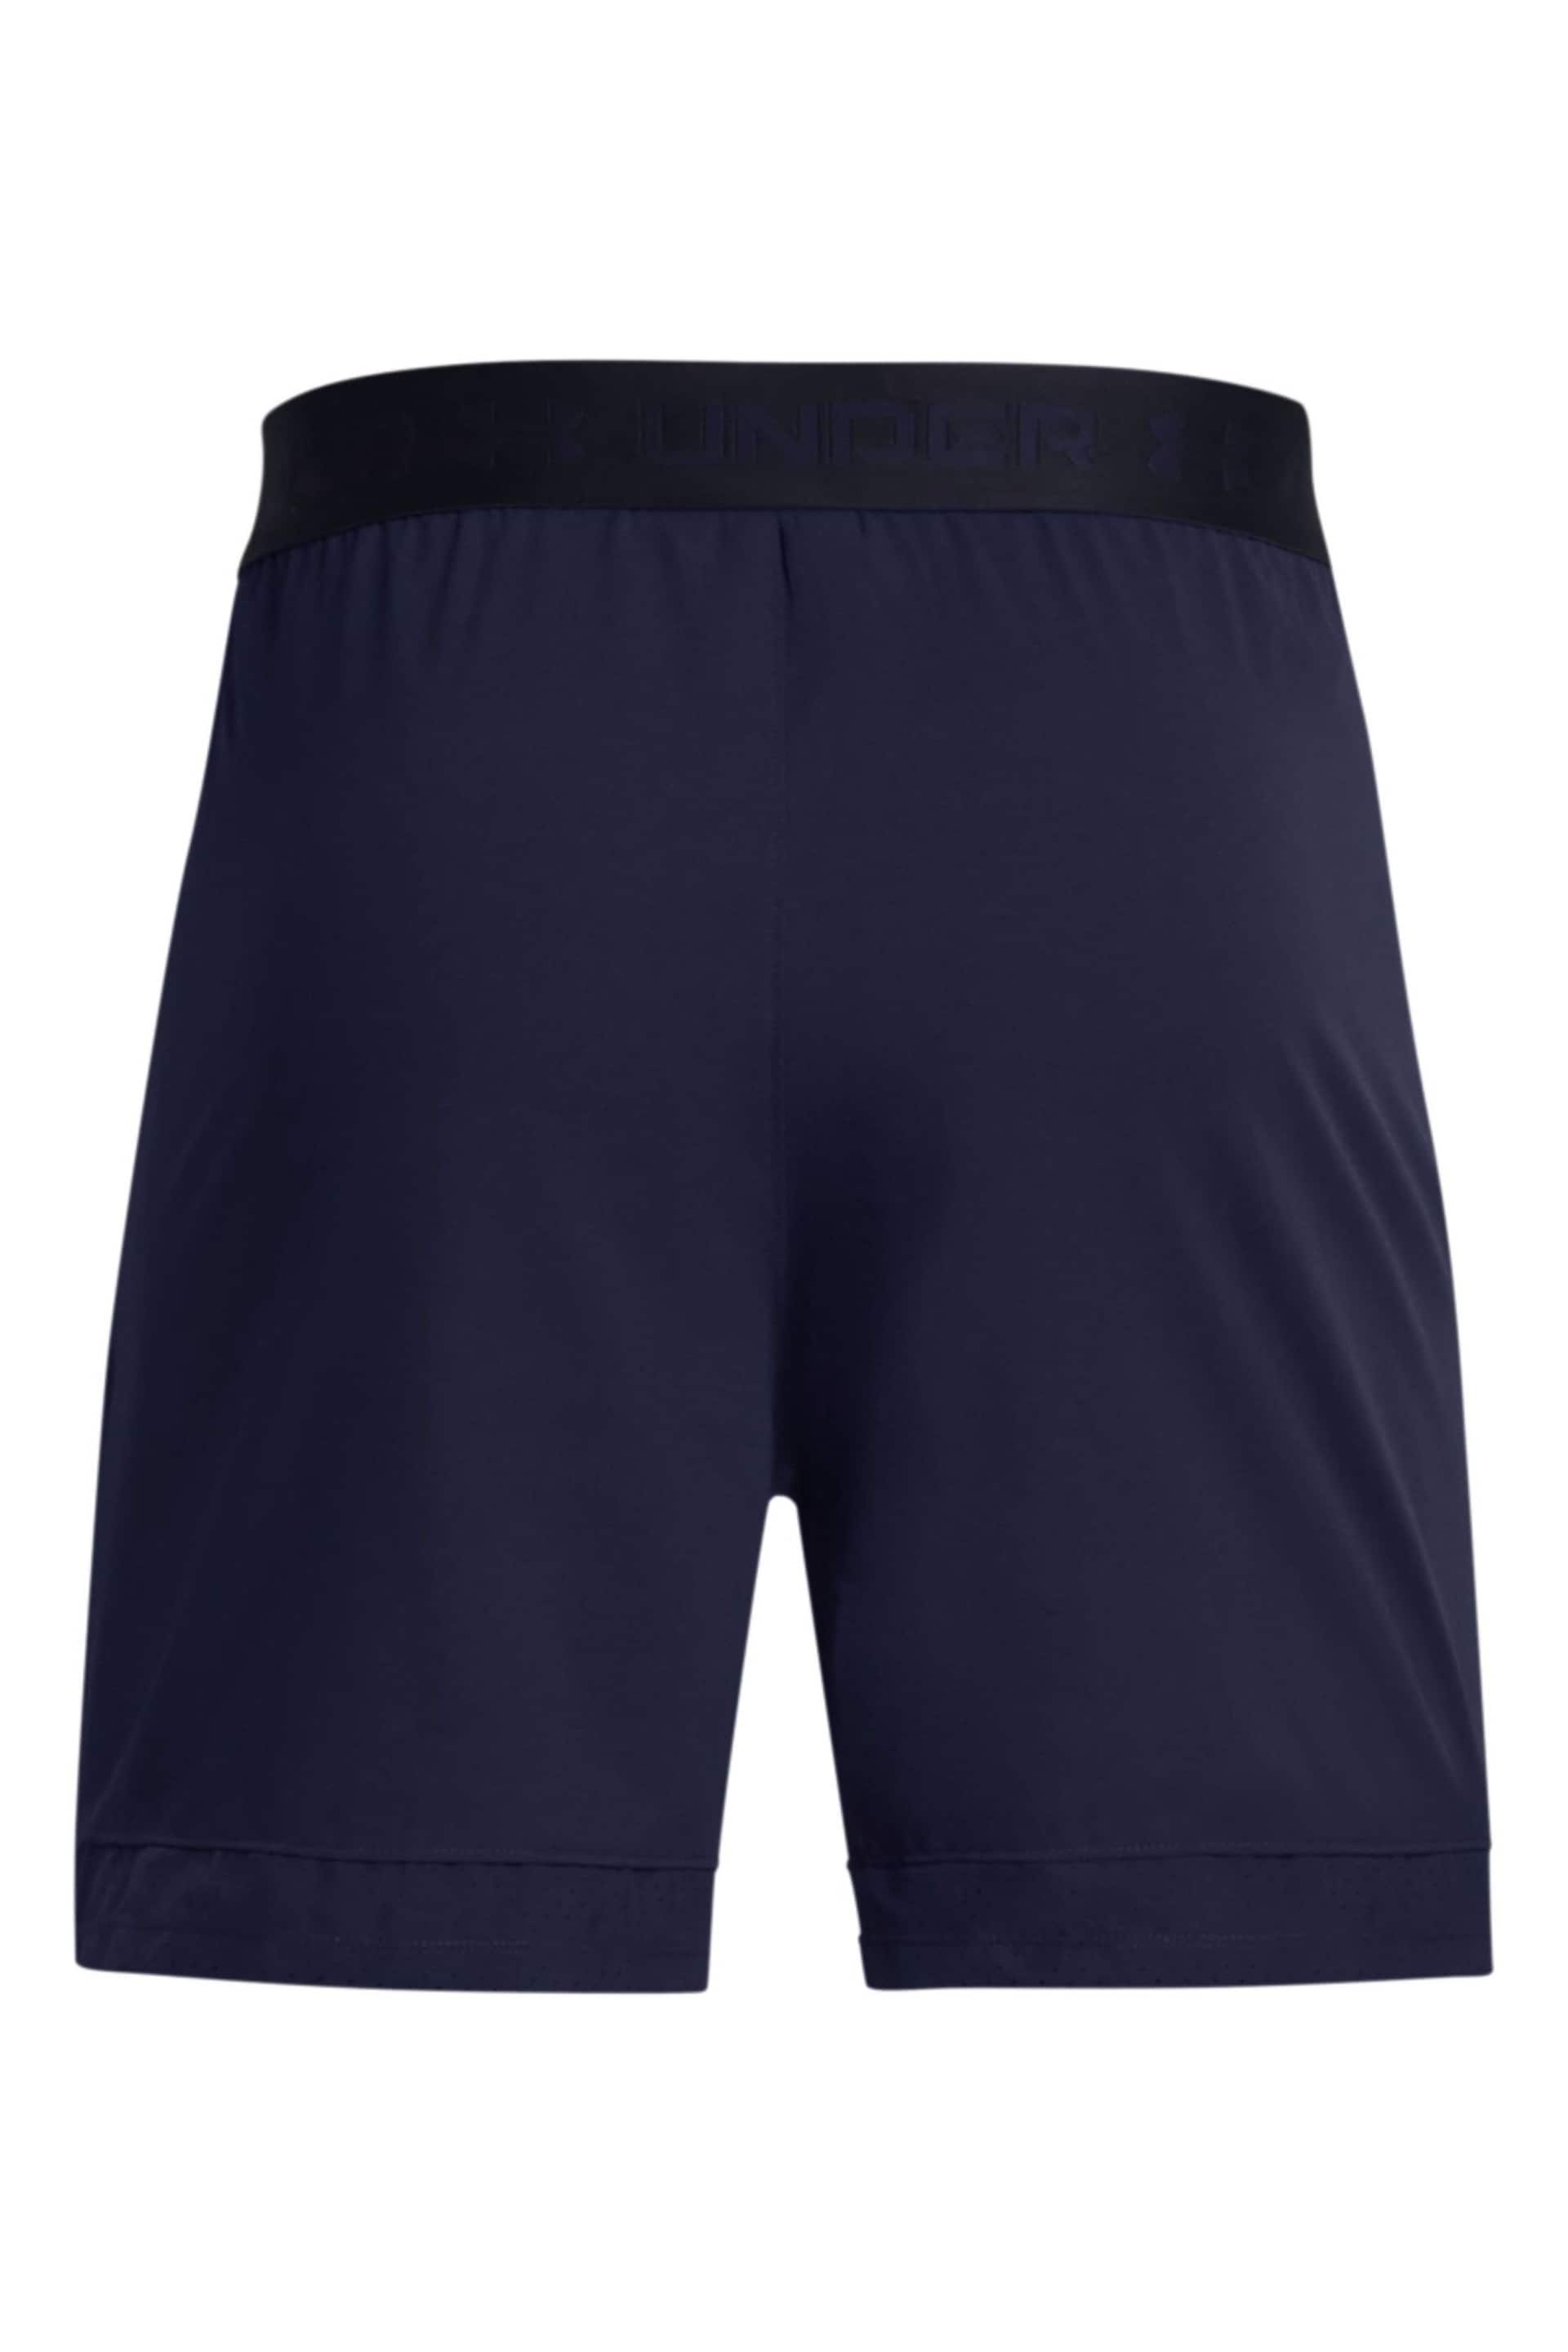 Under Armour Navy Under Armour Navy Vanish Shorts - Image 6 of 6